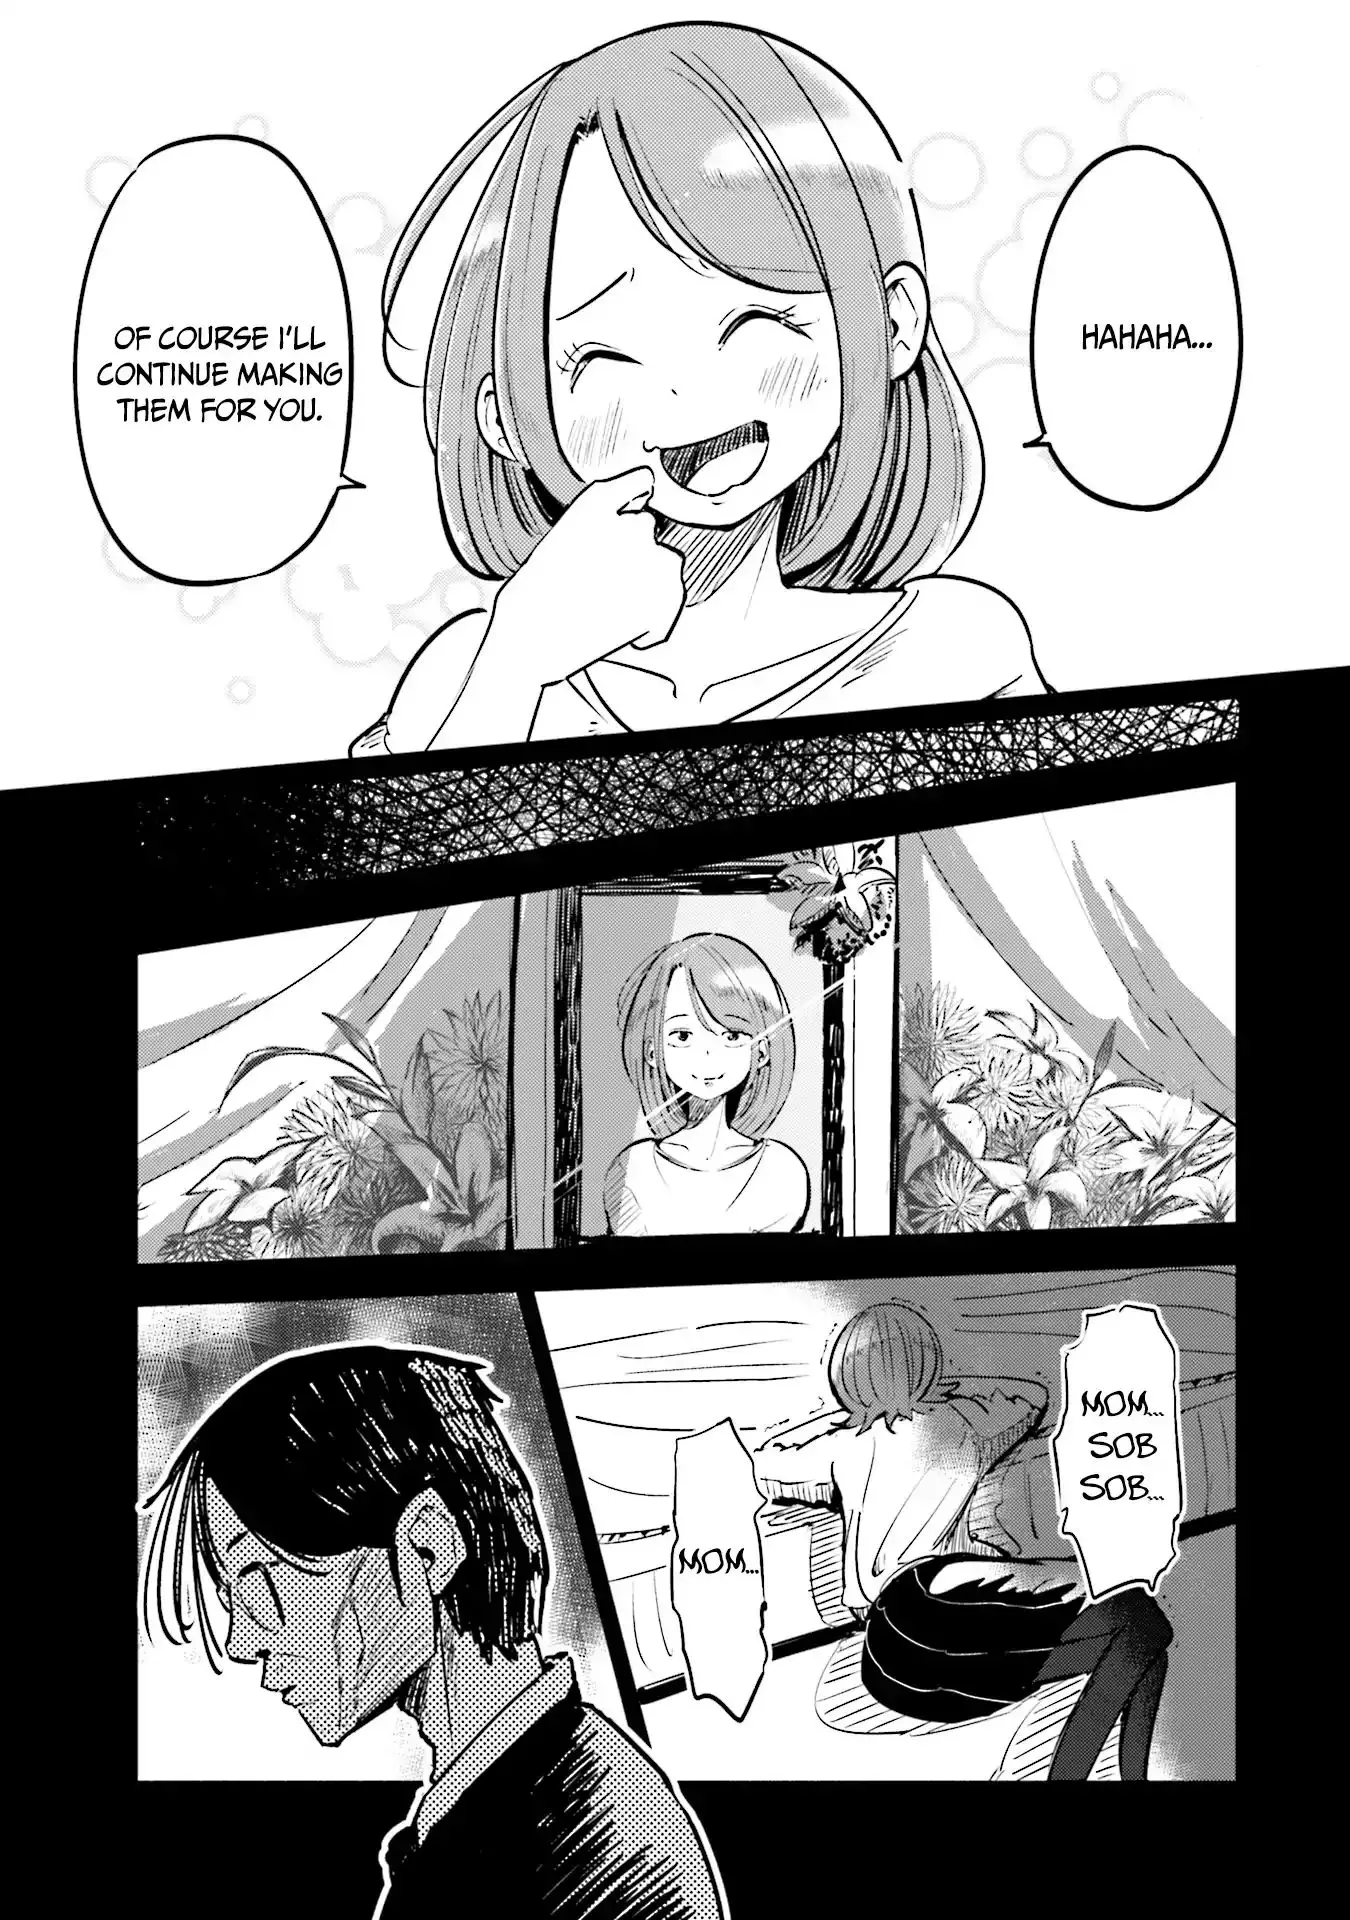 If My Wife Became An Elementary School Student - 1 page 18